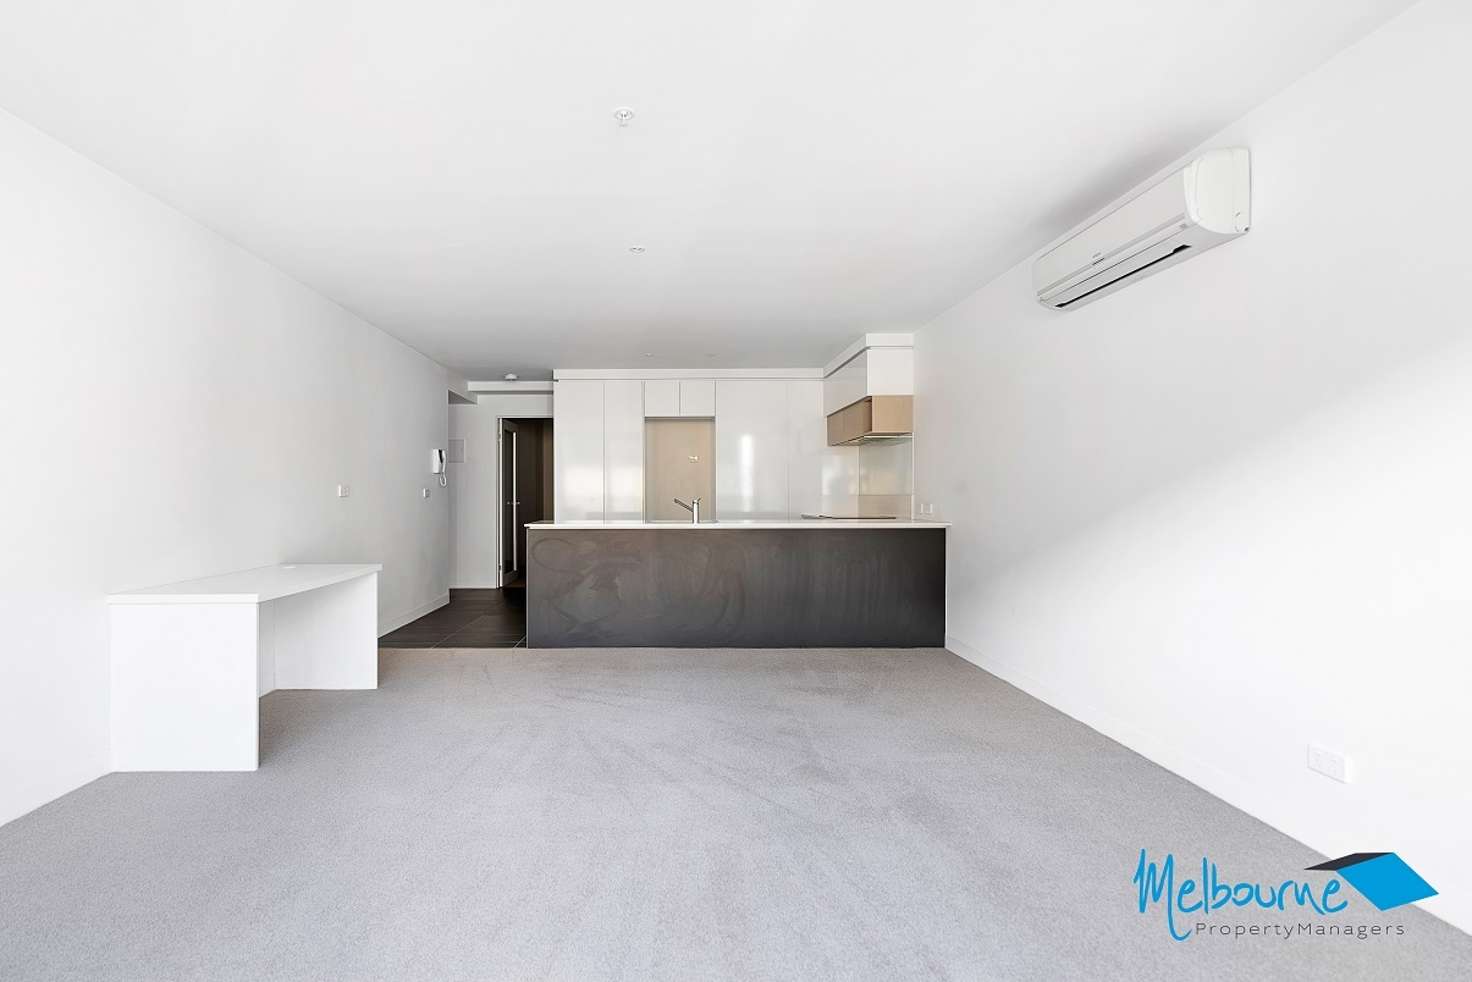 Main view of Homely apartment listing, 121/2 Golding St, Hawthorn VIC 3122